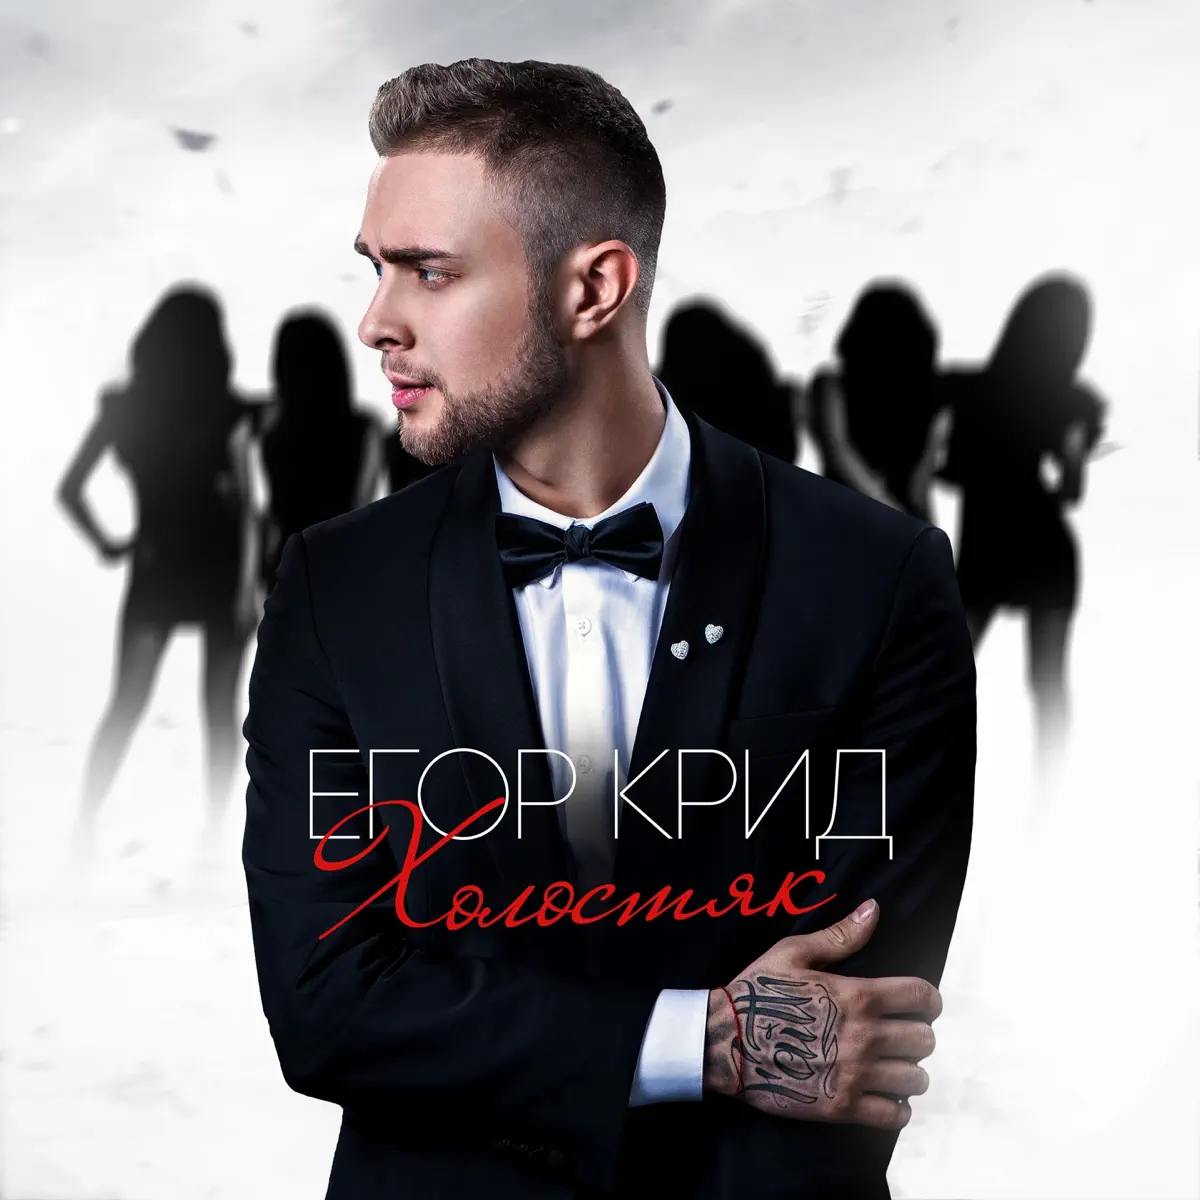 Egor Kreed - Холостяк (Deluxe Version) (2015) [iTunes Plus AAC M4A]-新房子